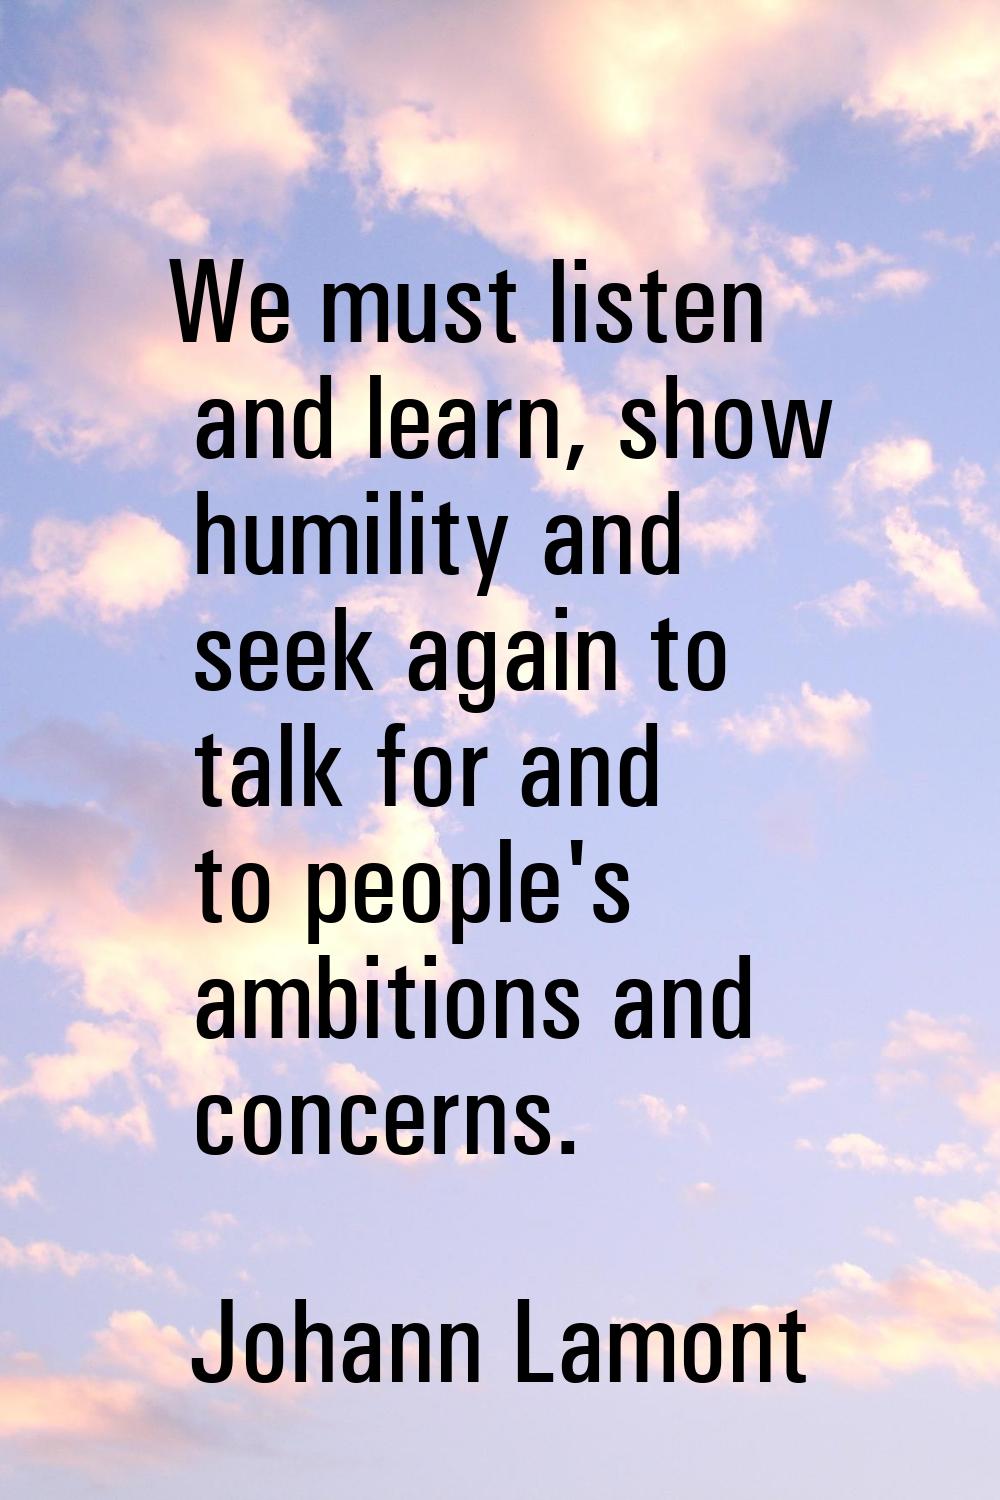 We must listen and learn, show humility and seek again to talk for and to people's ambitions and co